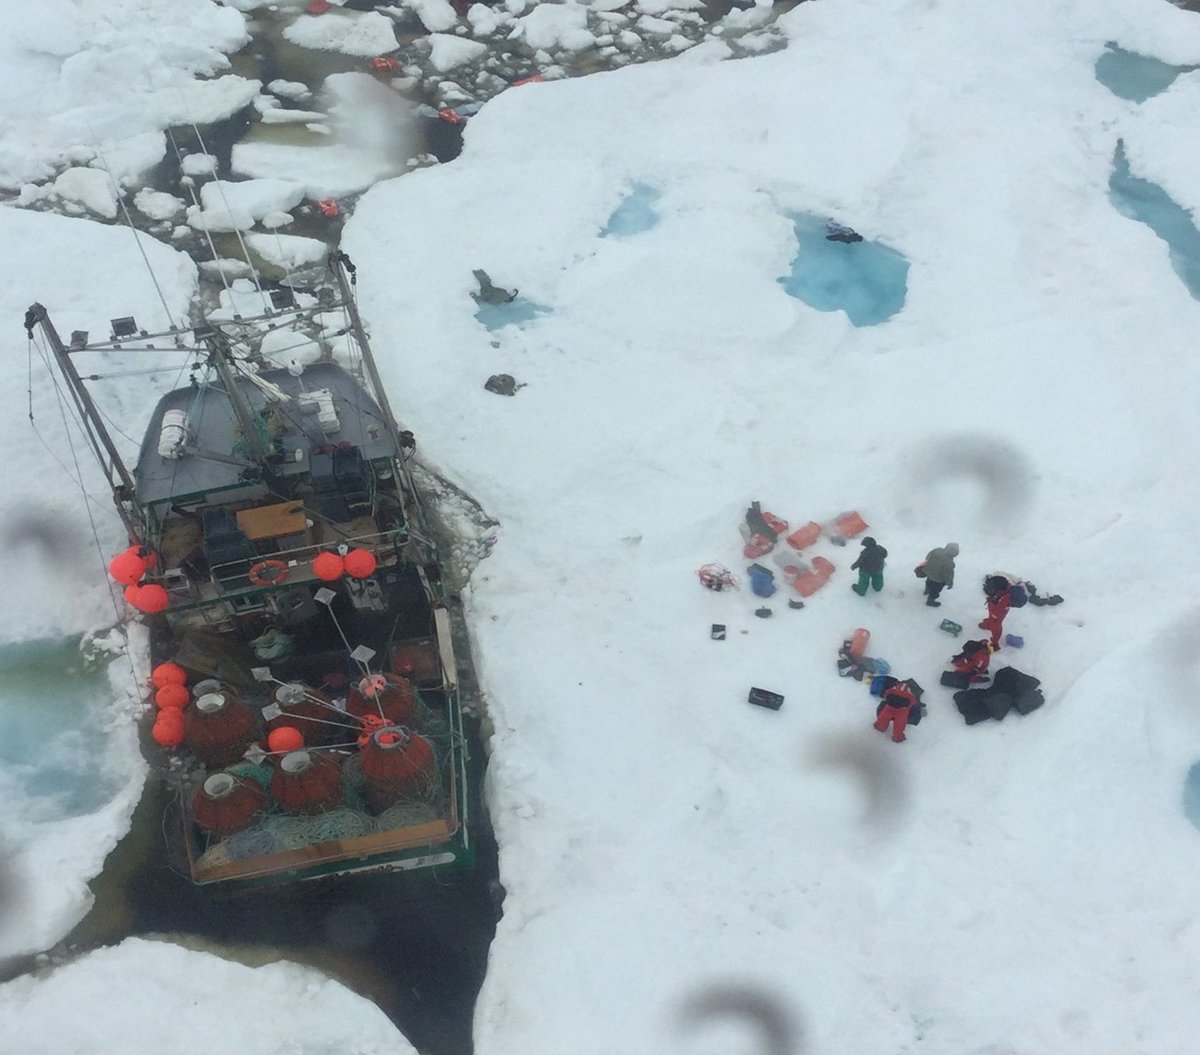 Fisherman were forced to be airlifted to safety after their boat began talking on water off the coast of Newfoundland.